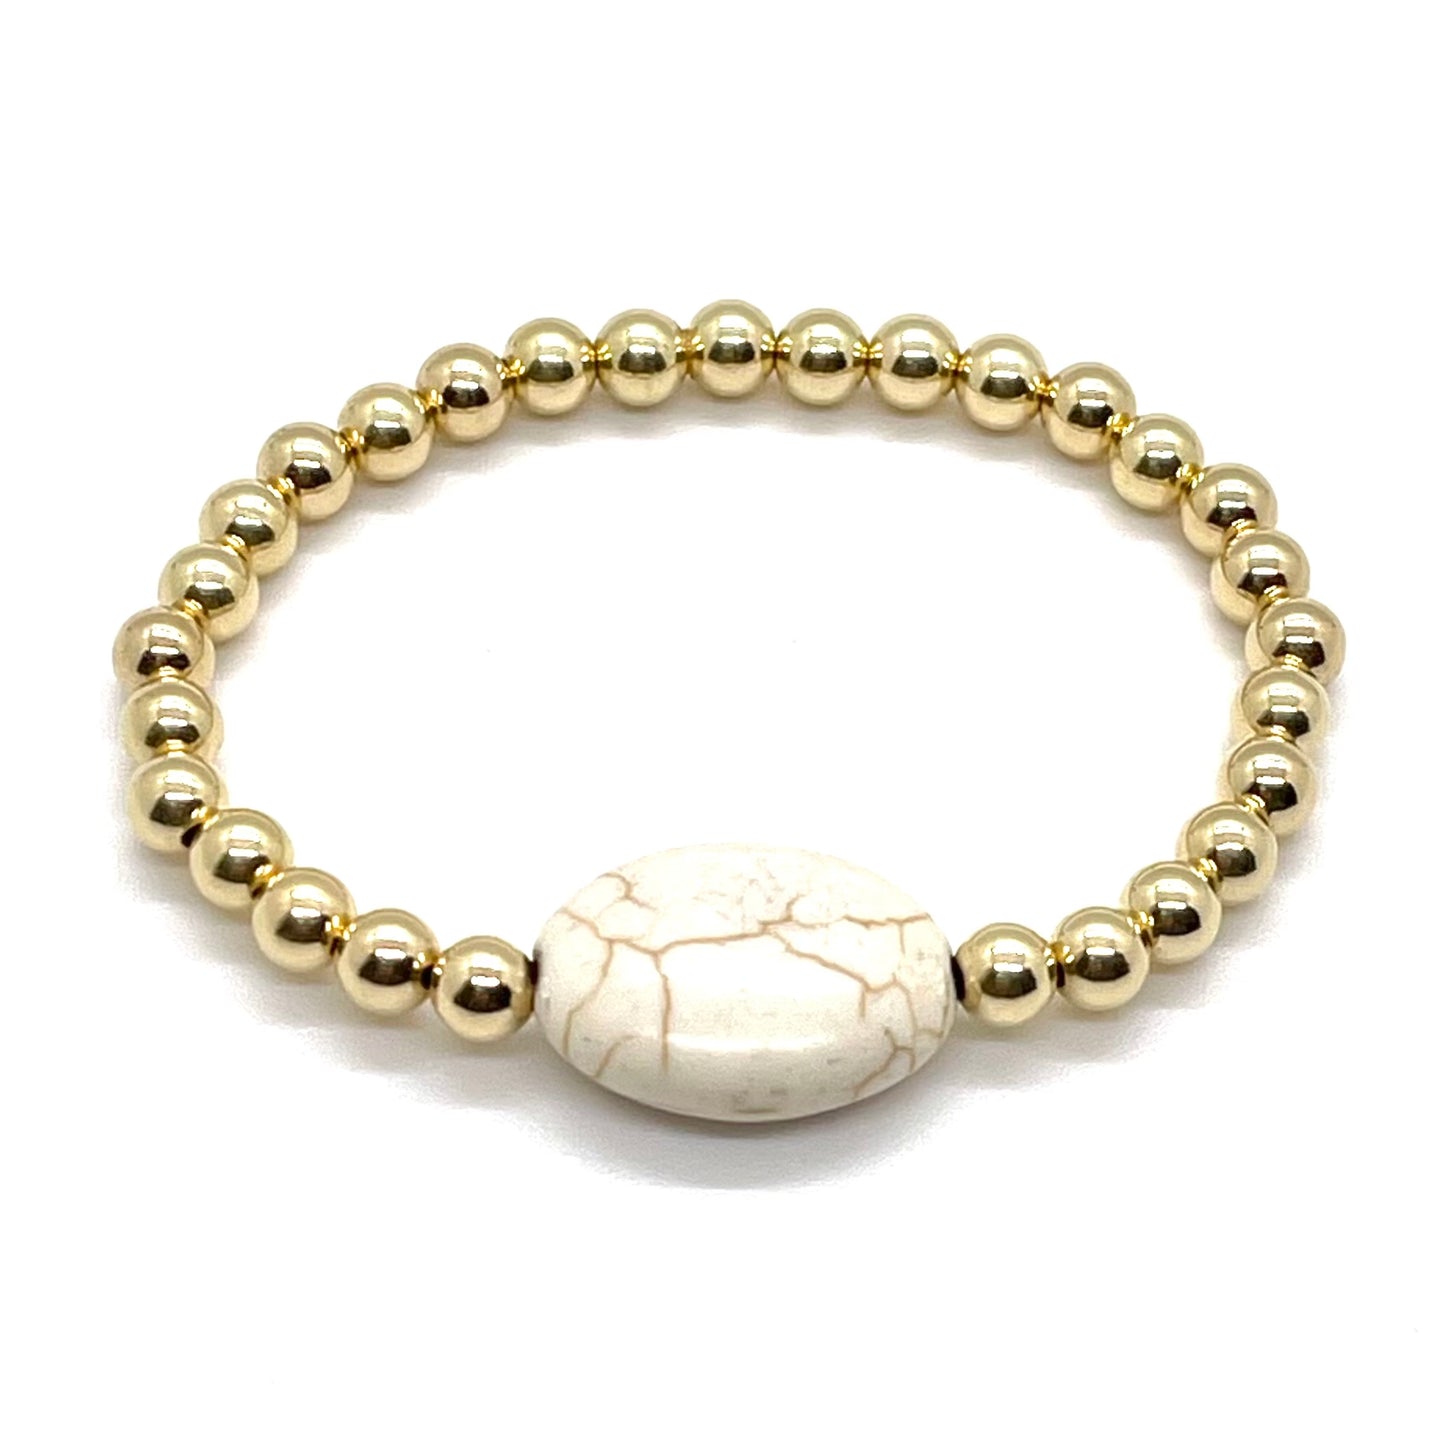 Magnesite bracelet with 5mm gold fill beads on elastic stretch.